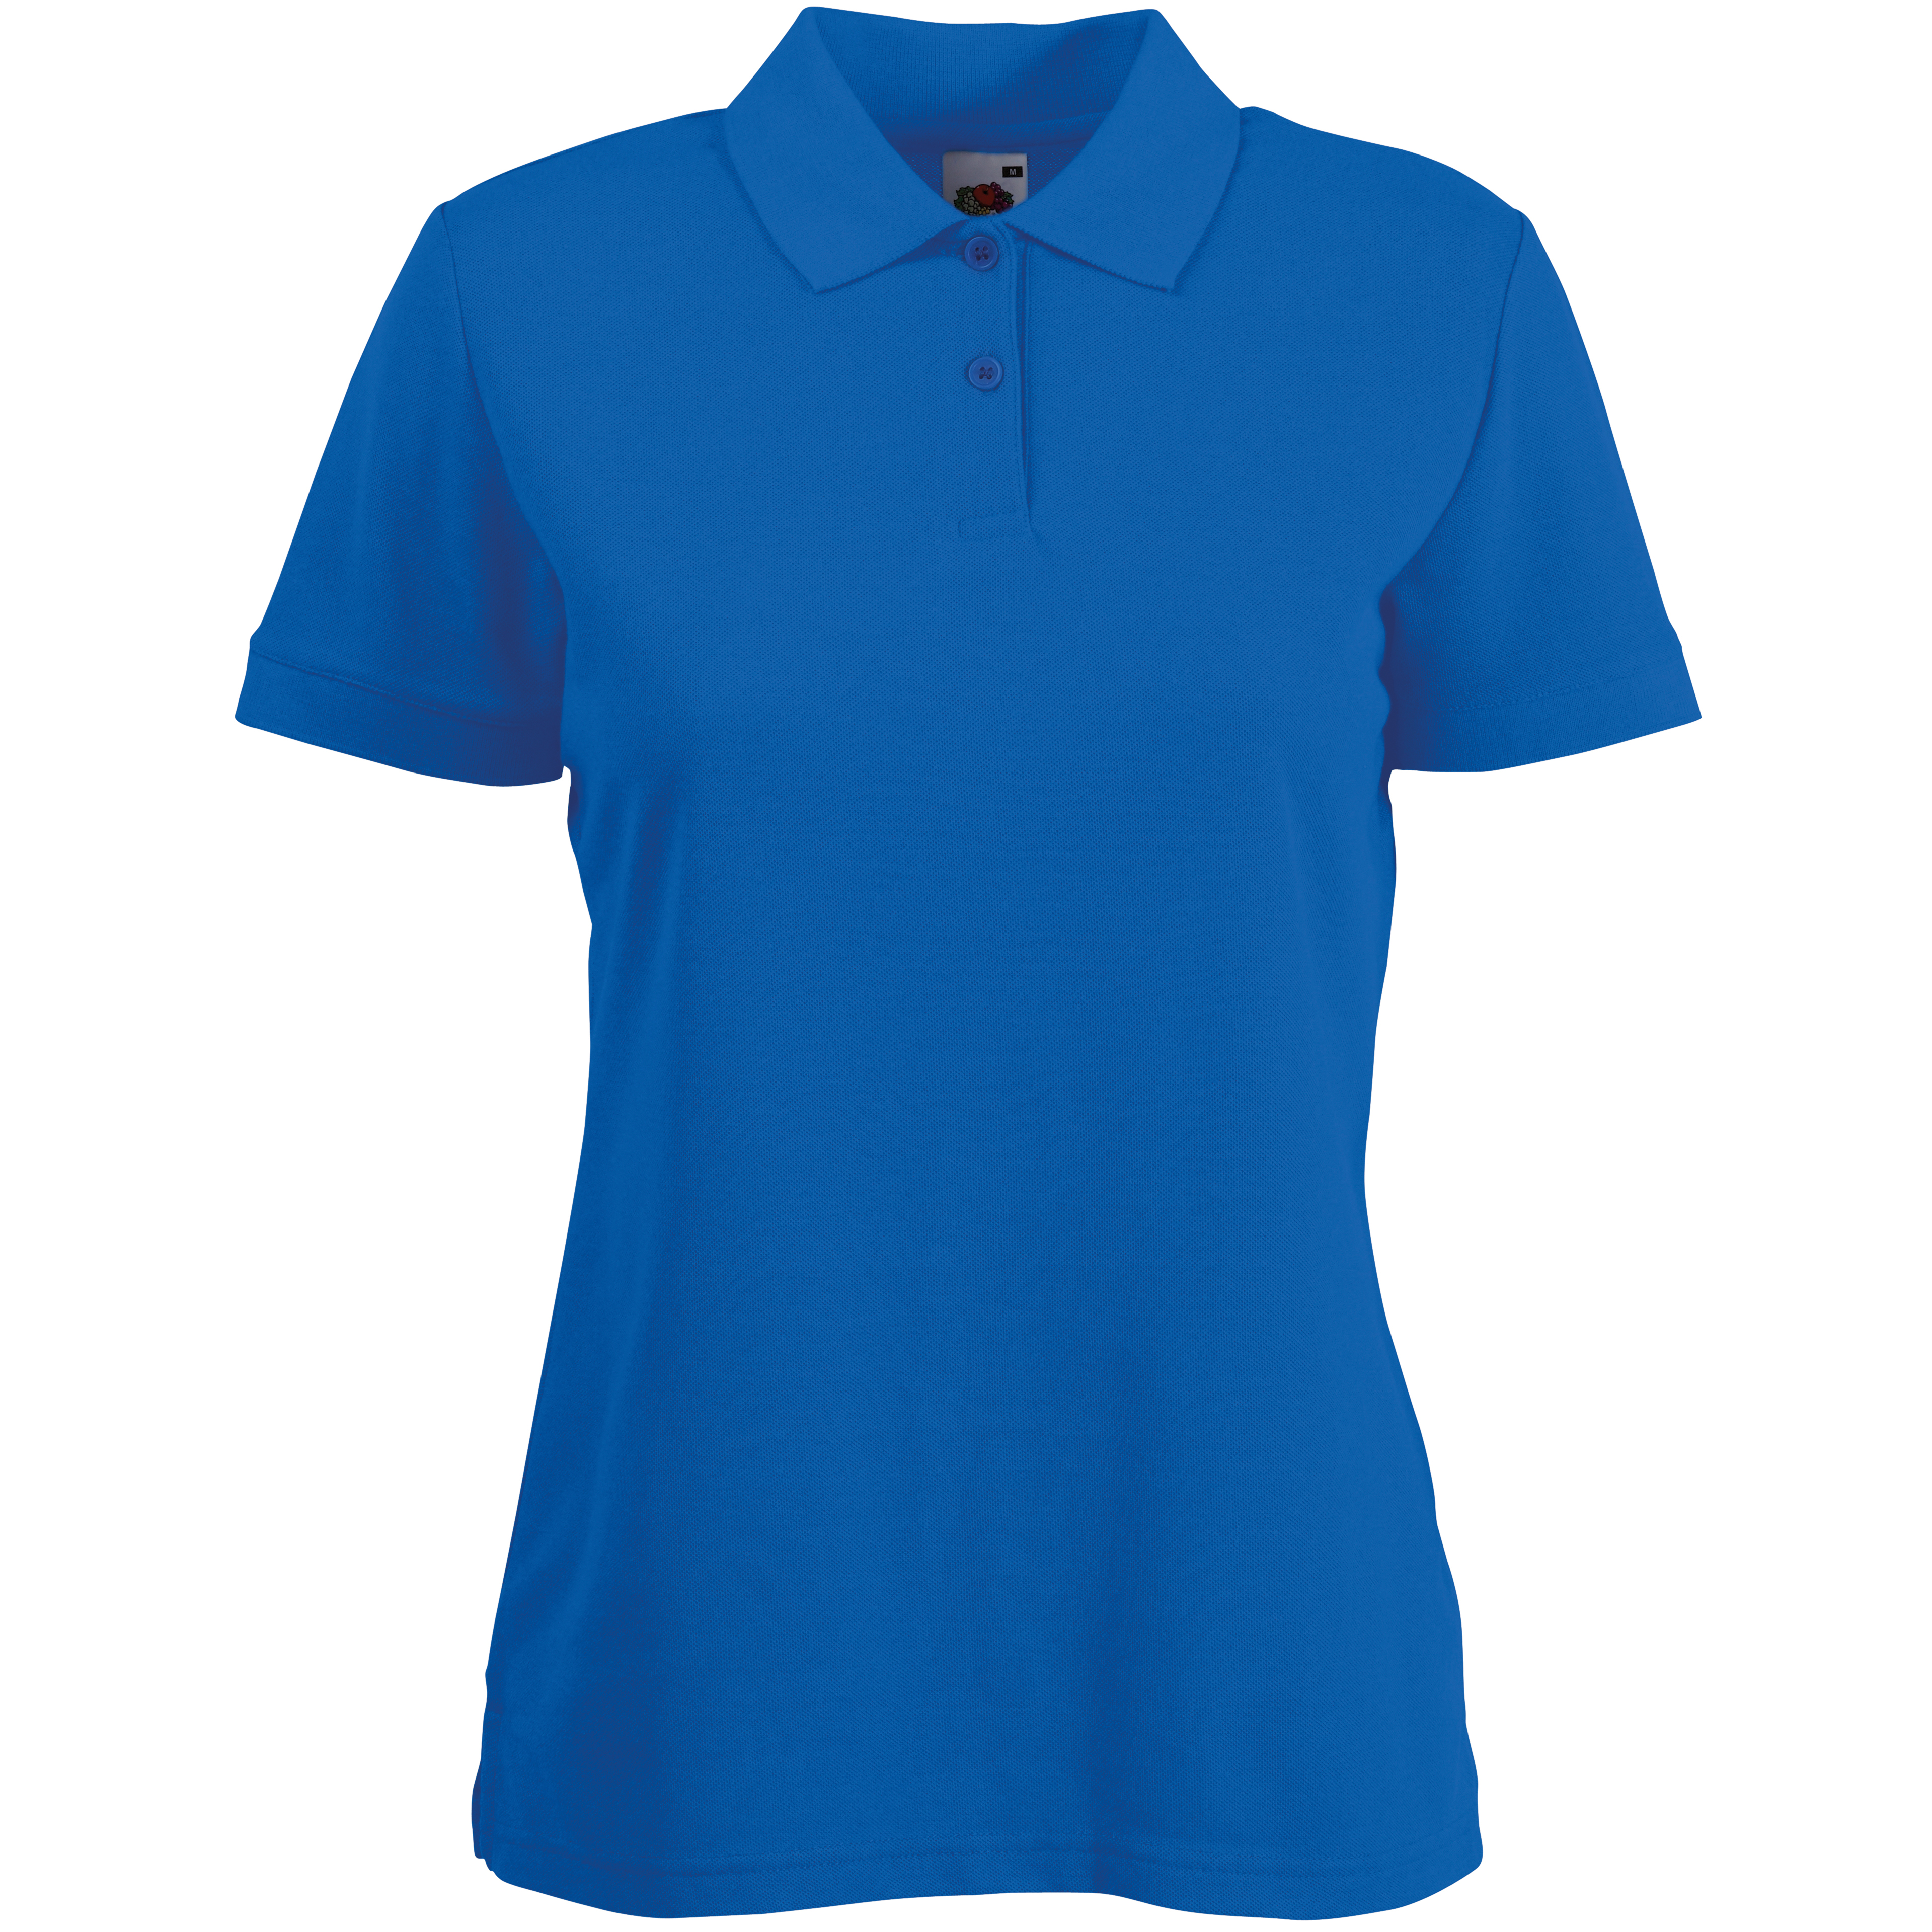 ax-httpswebsystems.s3.amazonaws.comtmp_for_downloadfruit-of-the-loom-ladies-65-35-polo-royal-blue.jpg